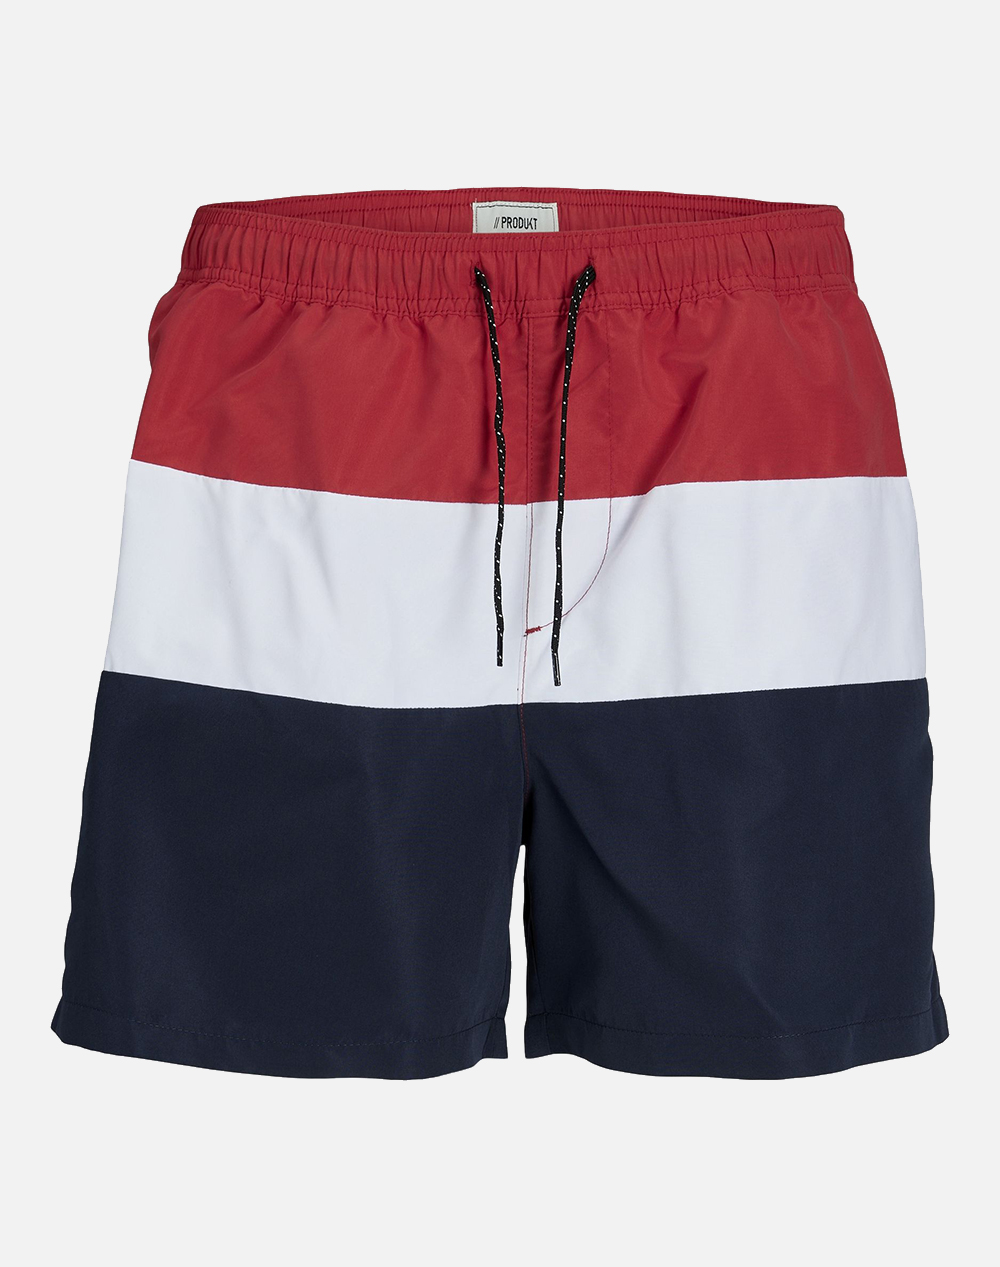 PRODUCT PKTAKM COLORBLOCK SWIMSHORTS 12252194-Chinese Red Red 3820APROD1600007_XR19960